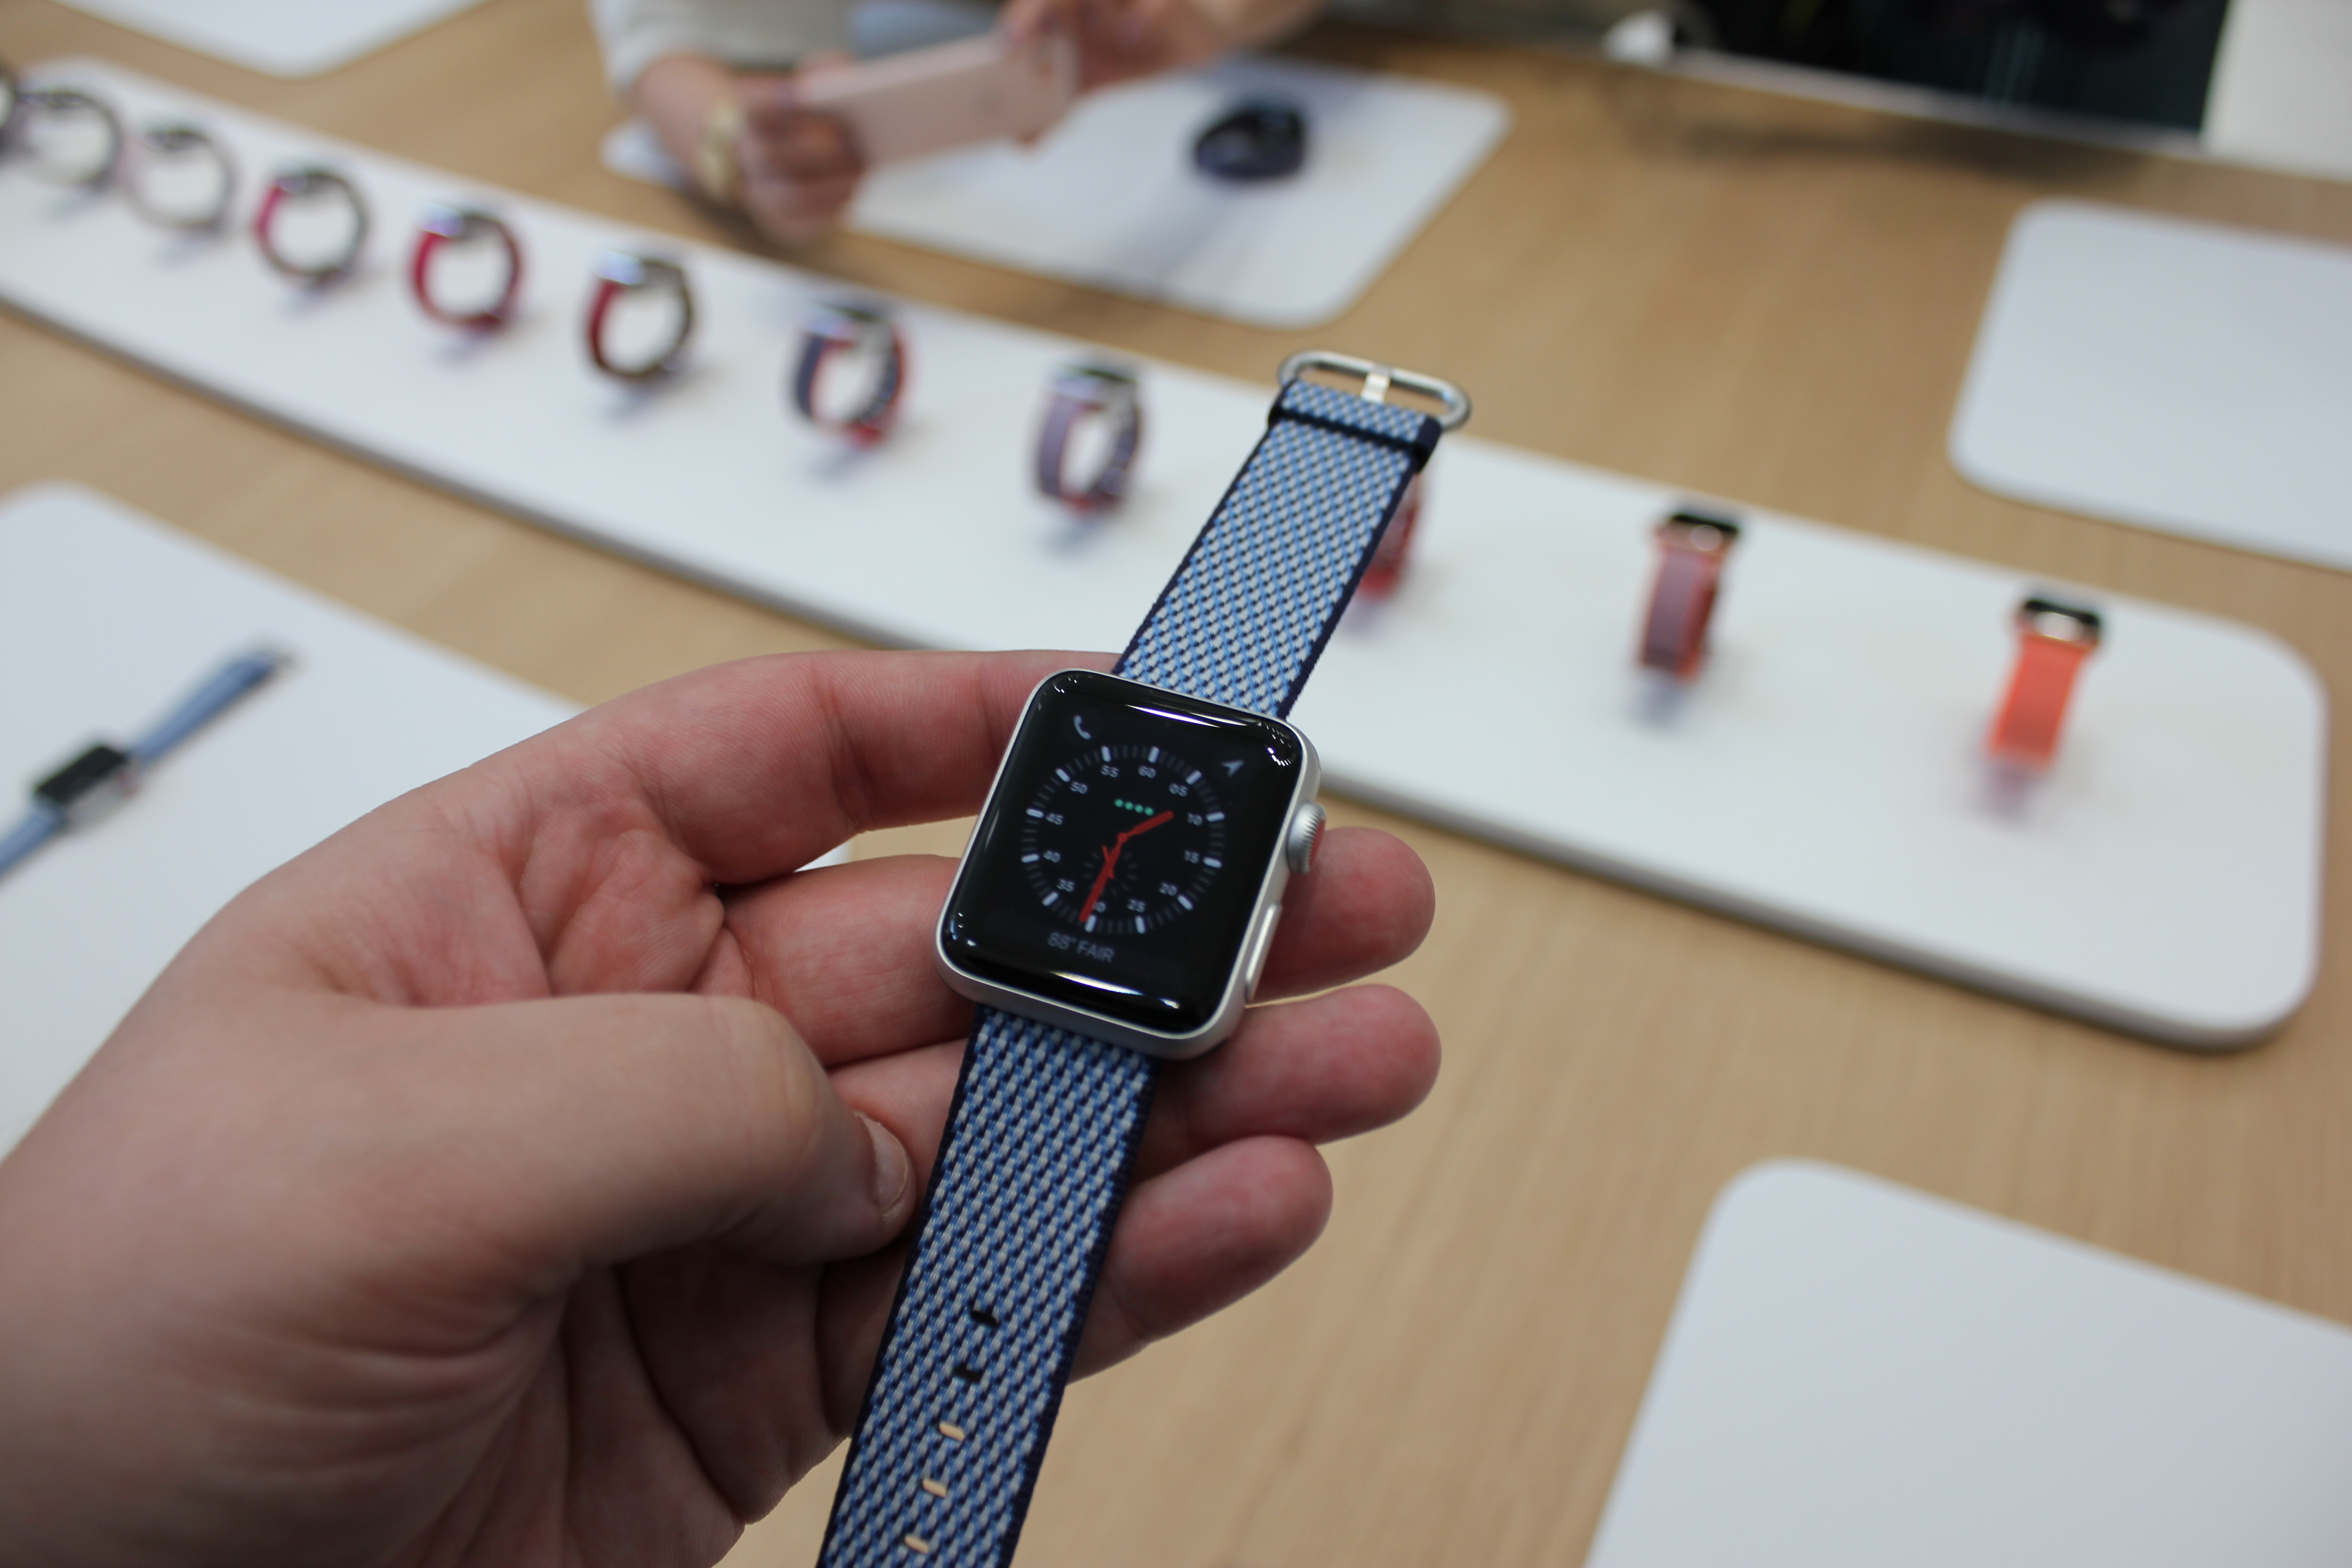 Apple Watch Series 3, dead in all but name, now actually dead